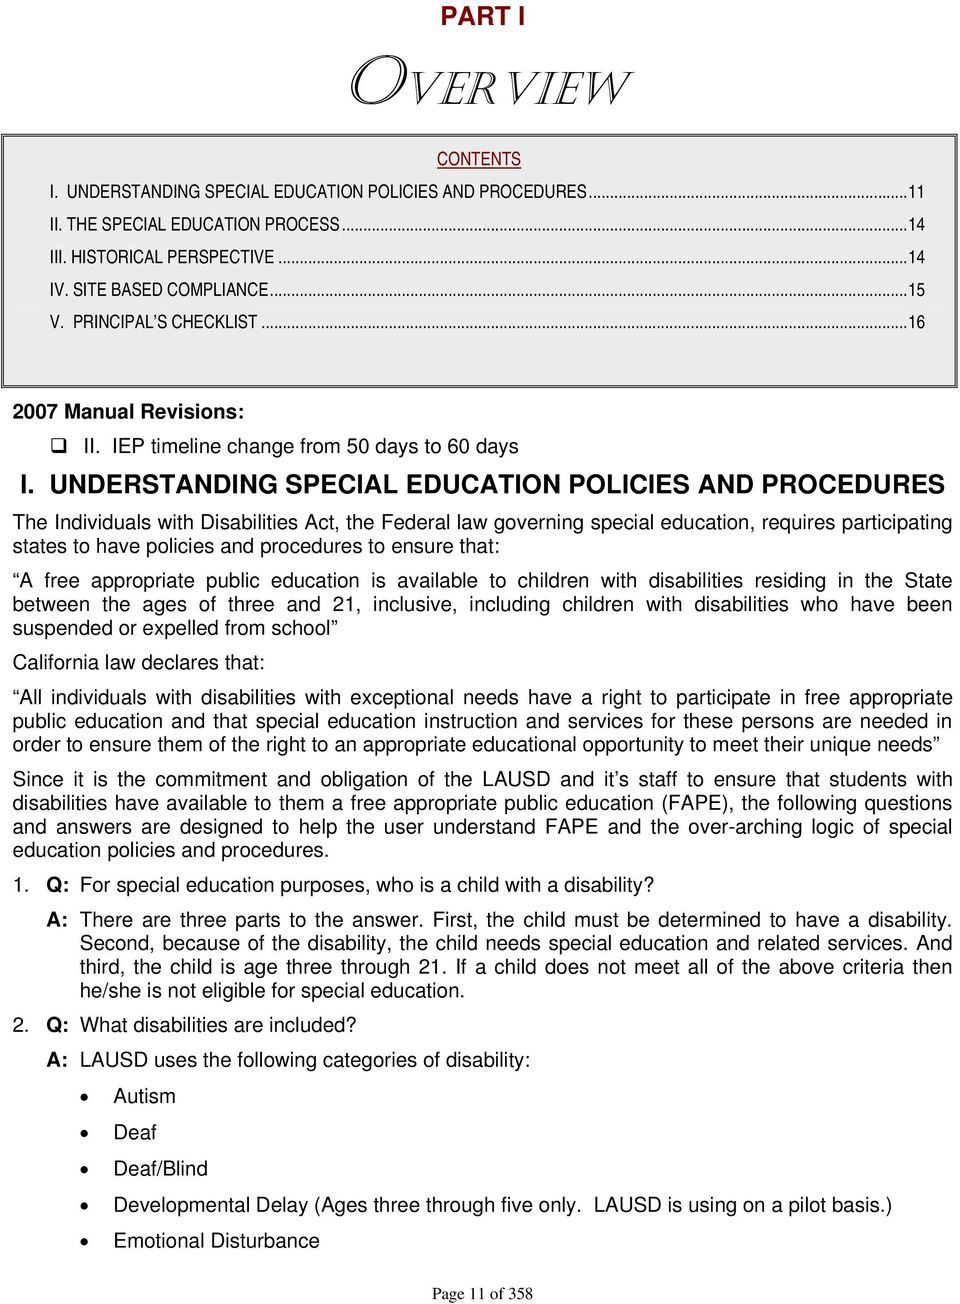 UNDERSTANDING SPECIAL EDUCATION POLICIES AND PROCEDURES The Individuals with Disabilities Act, the Federal law governing special education, requires participating states to have policies and